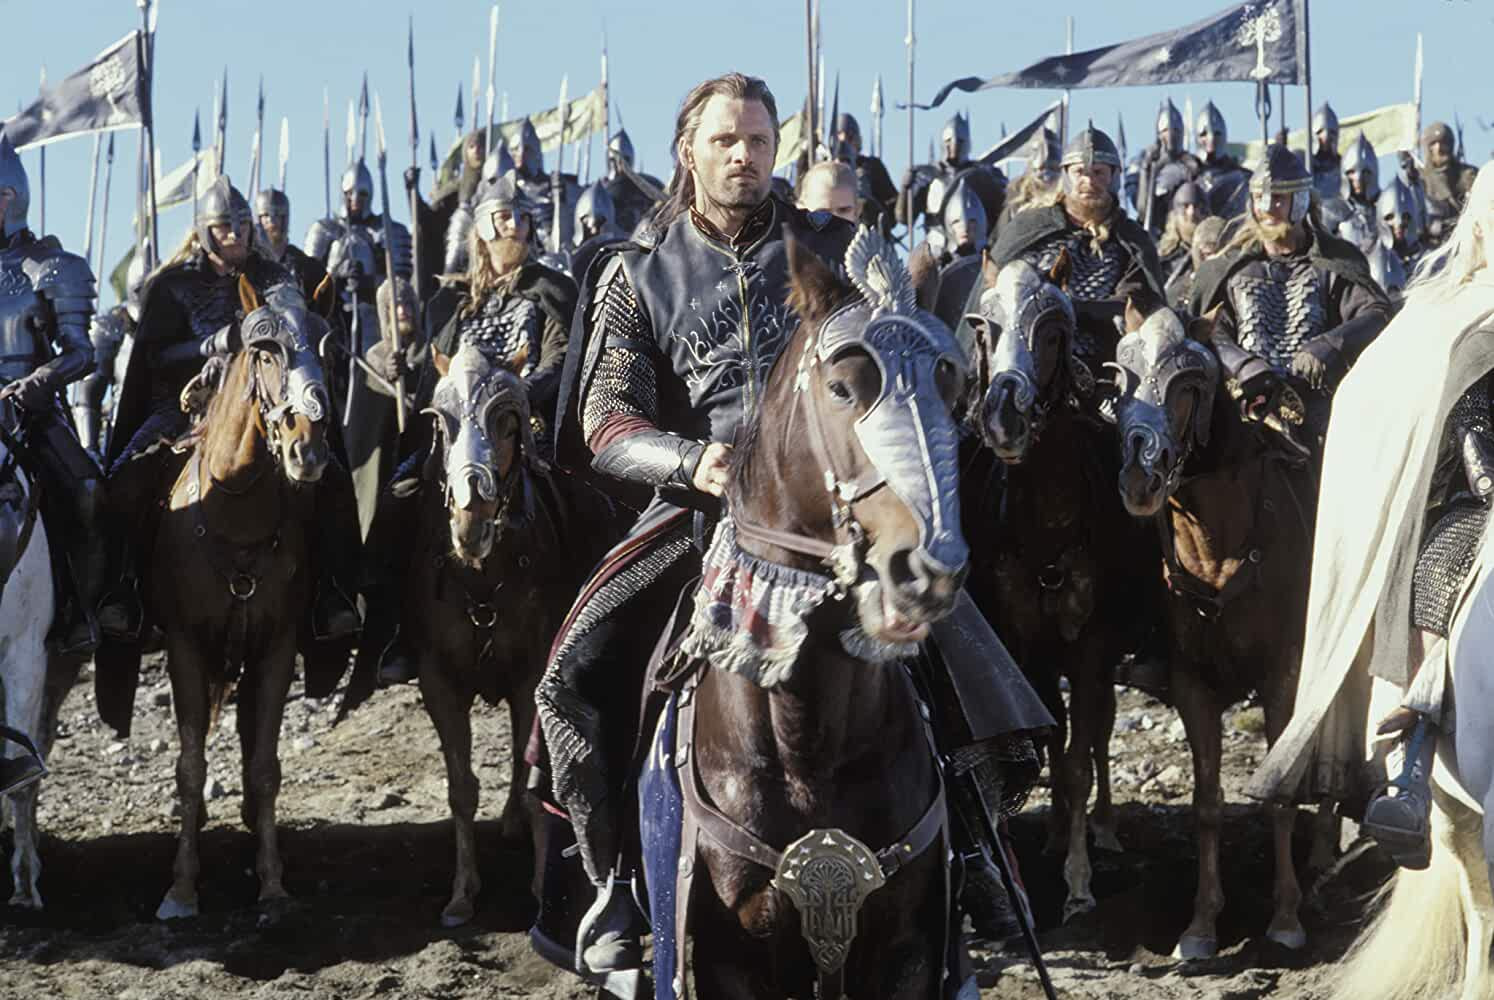 Lord of the Rings series: Viggo Mortensen on a horse leading an army